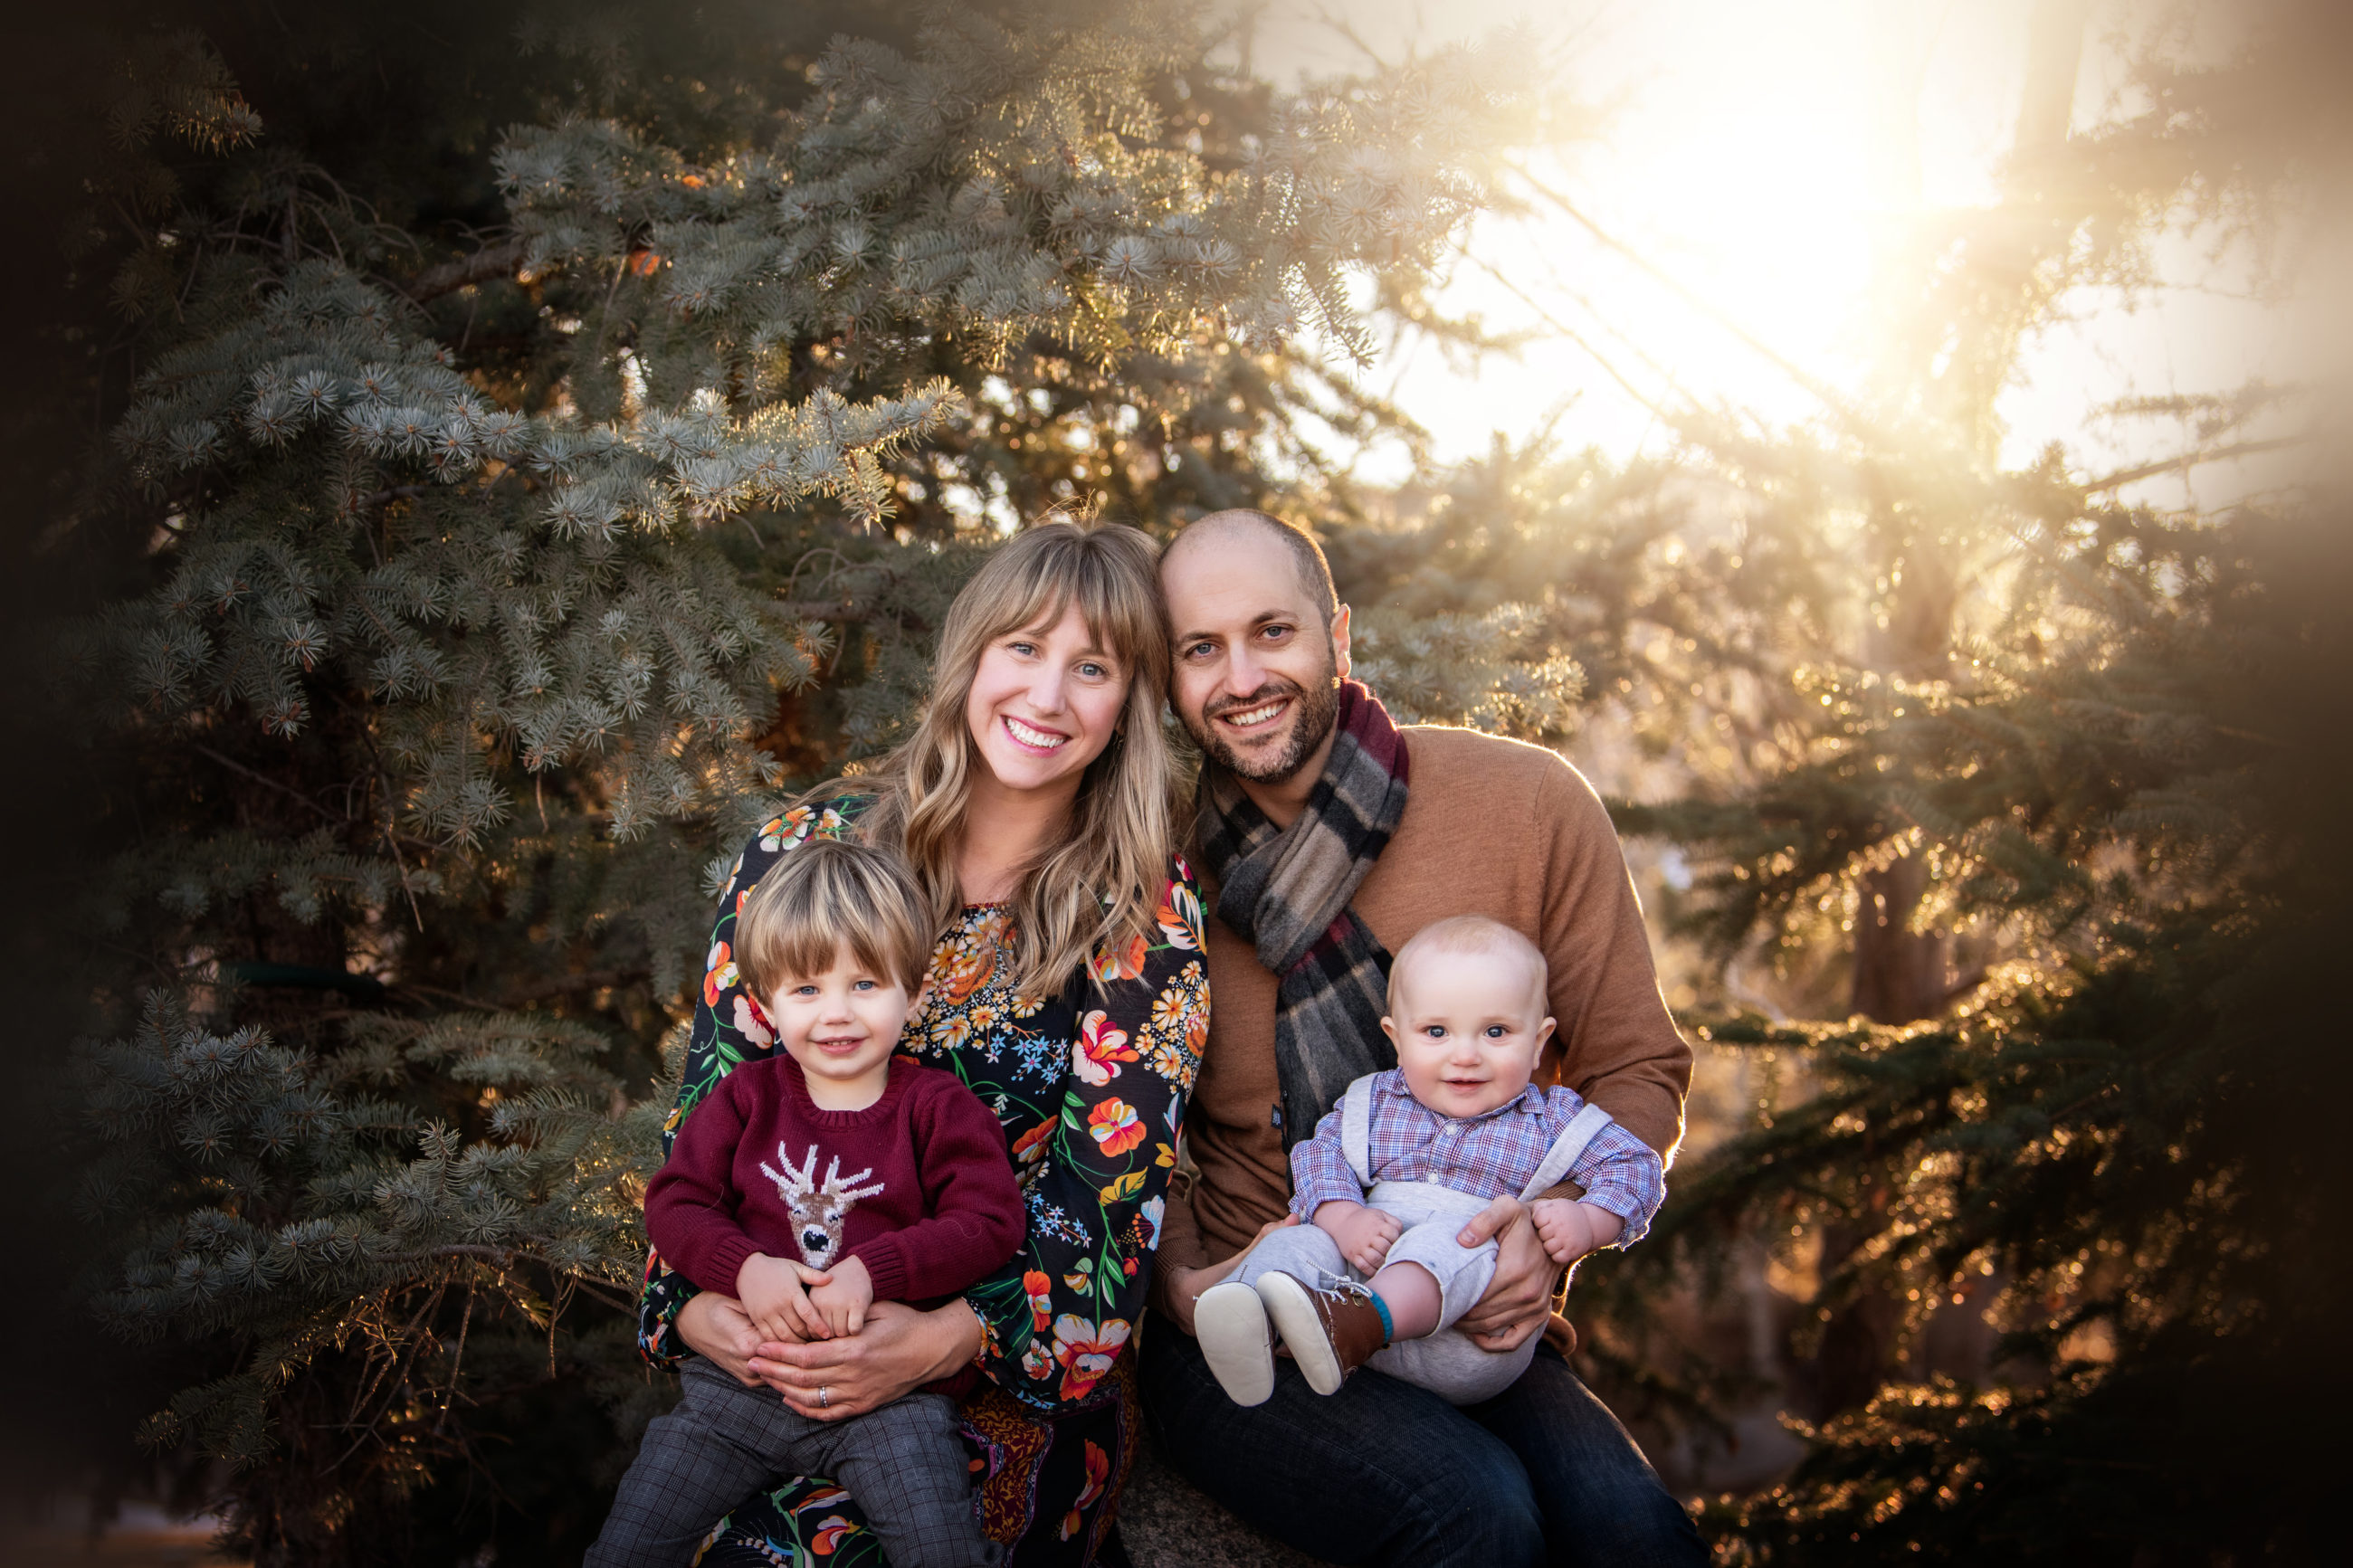 love and light - boulder photographer - family of 4 portrait in backlight with pine trees